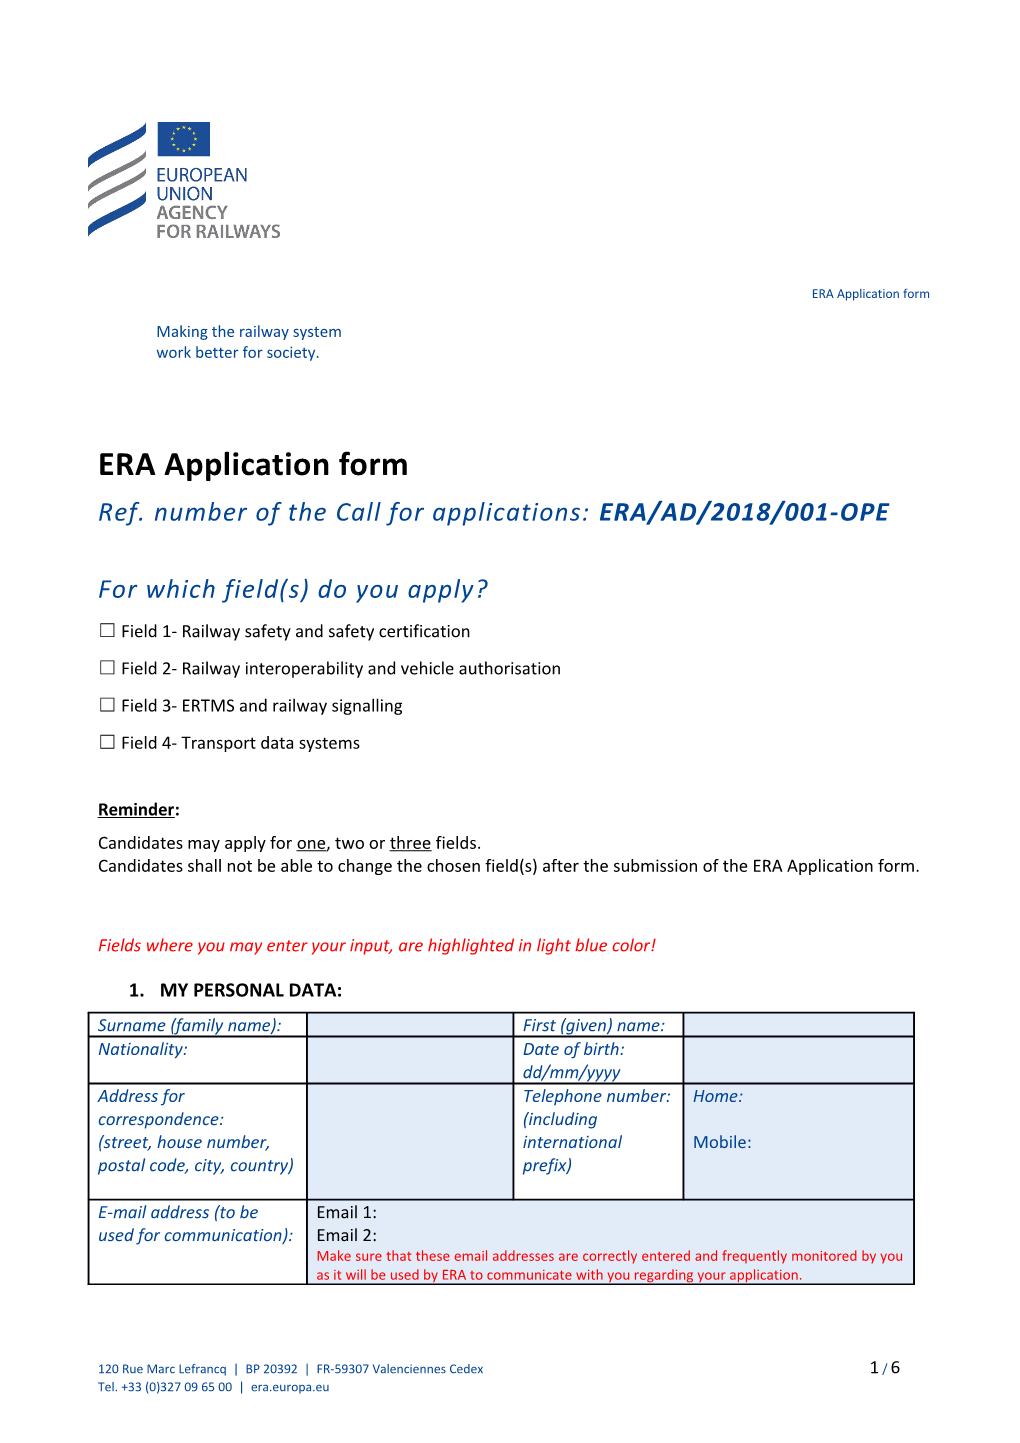 Ref.Number of the Call for Applications: ERA/AD/2018/001-OPE